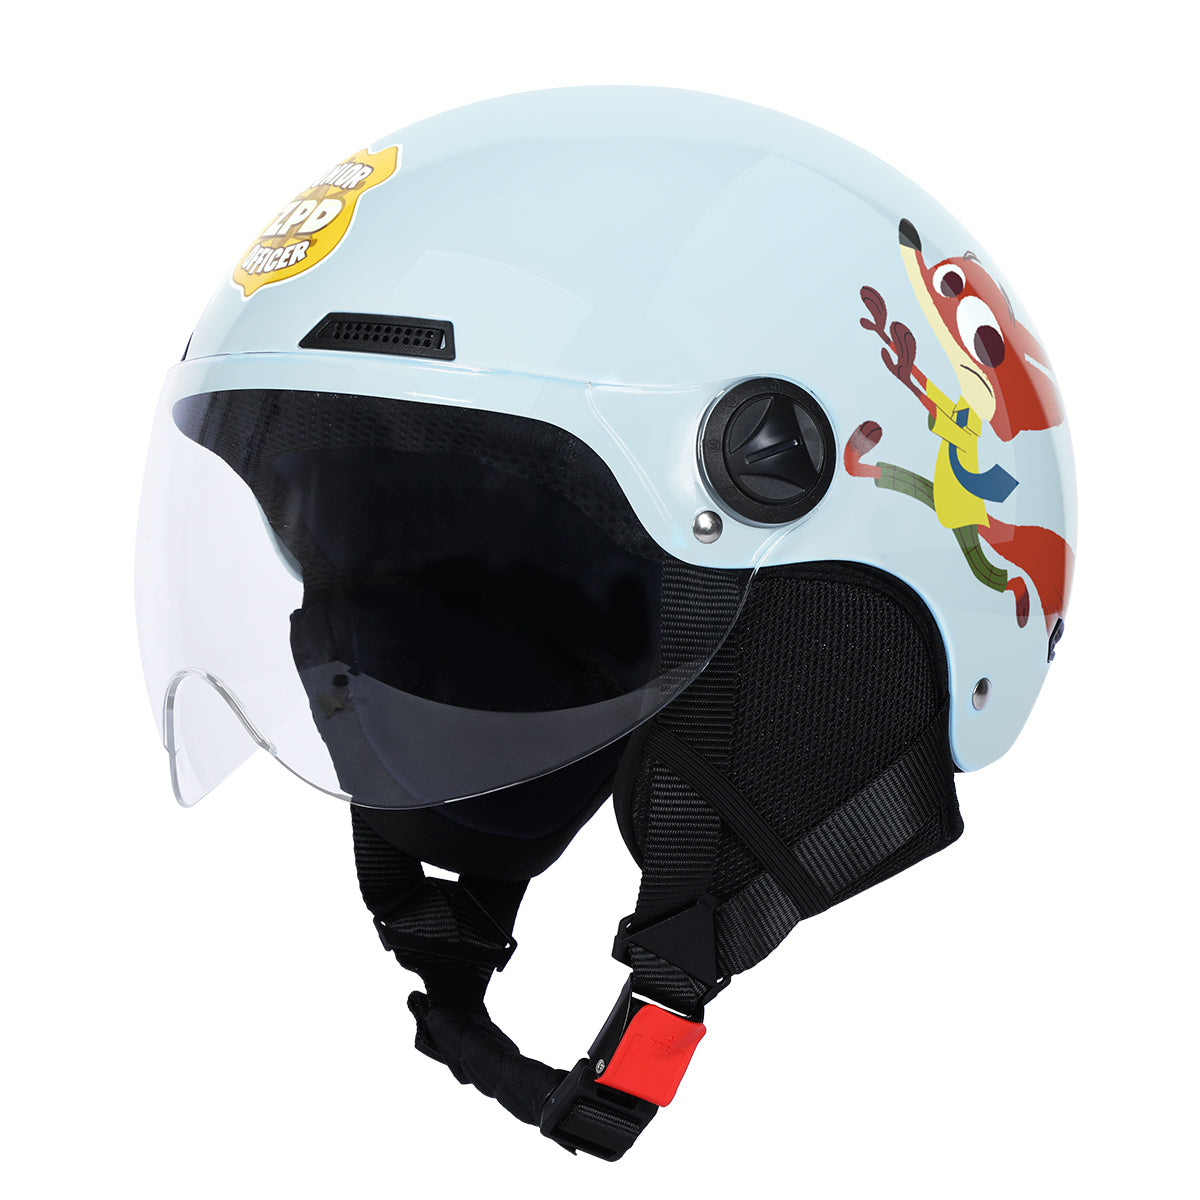 DISNEY Alien Moto cycle Helmet - Adult Lovely and Safety Integrally 22318